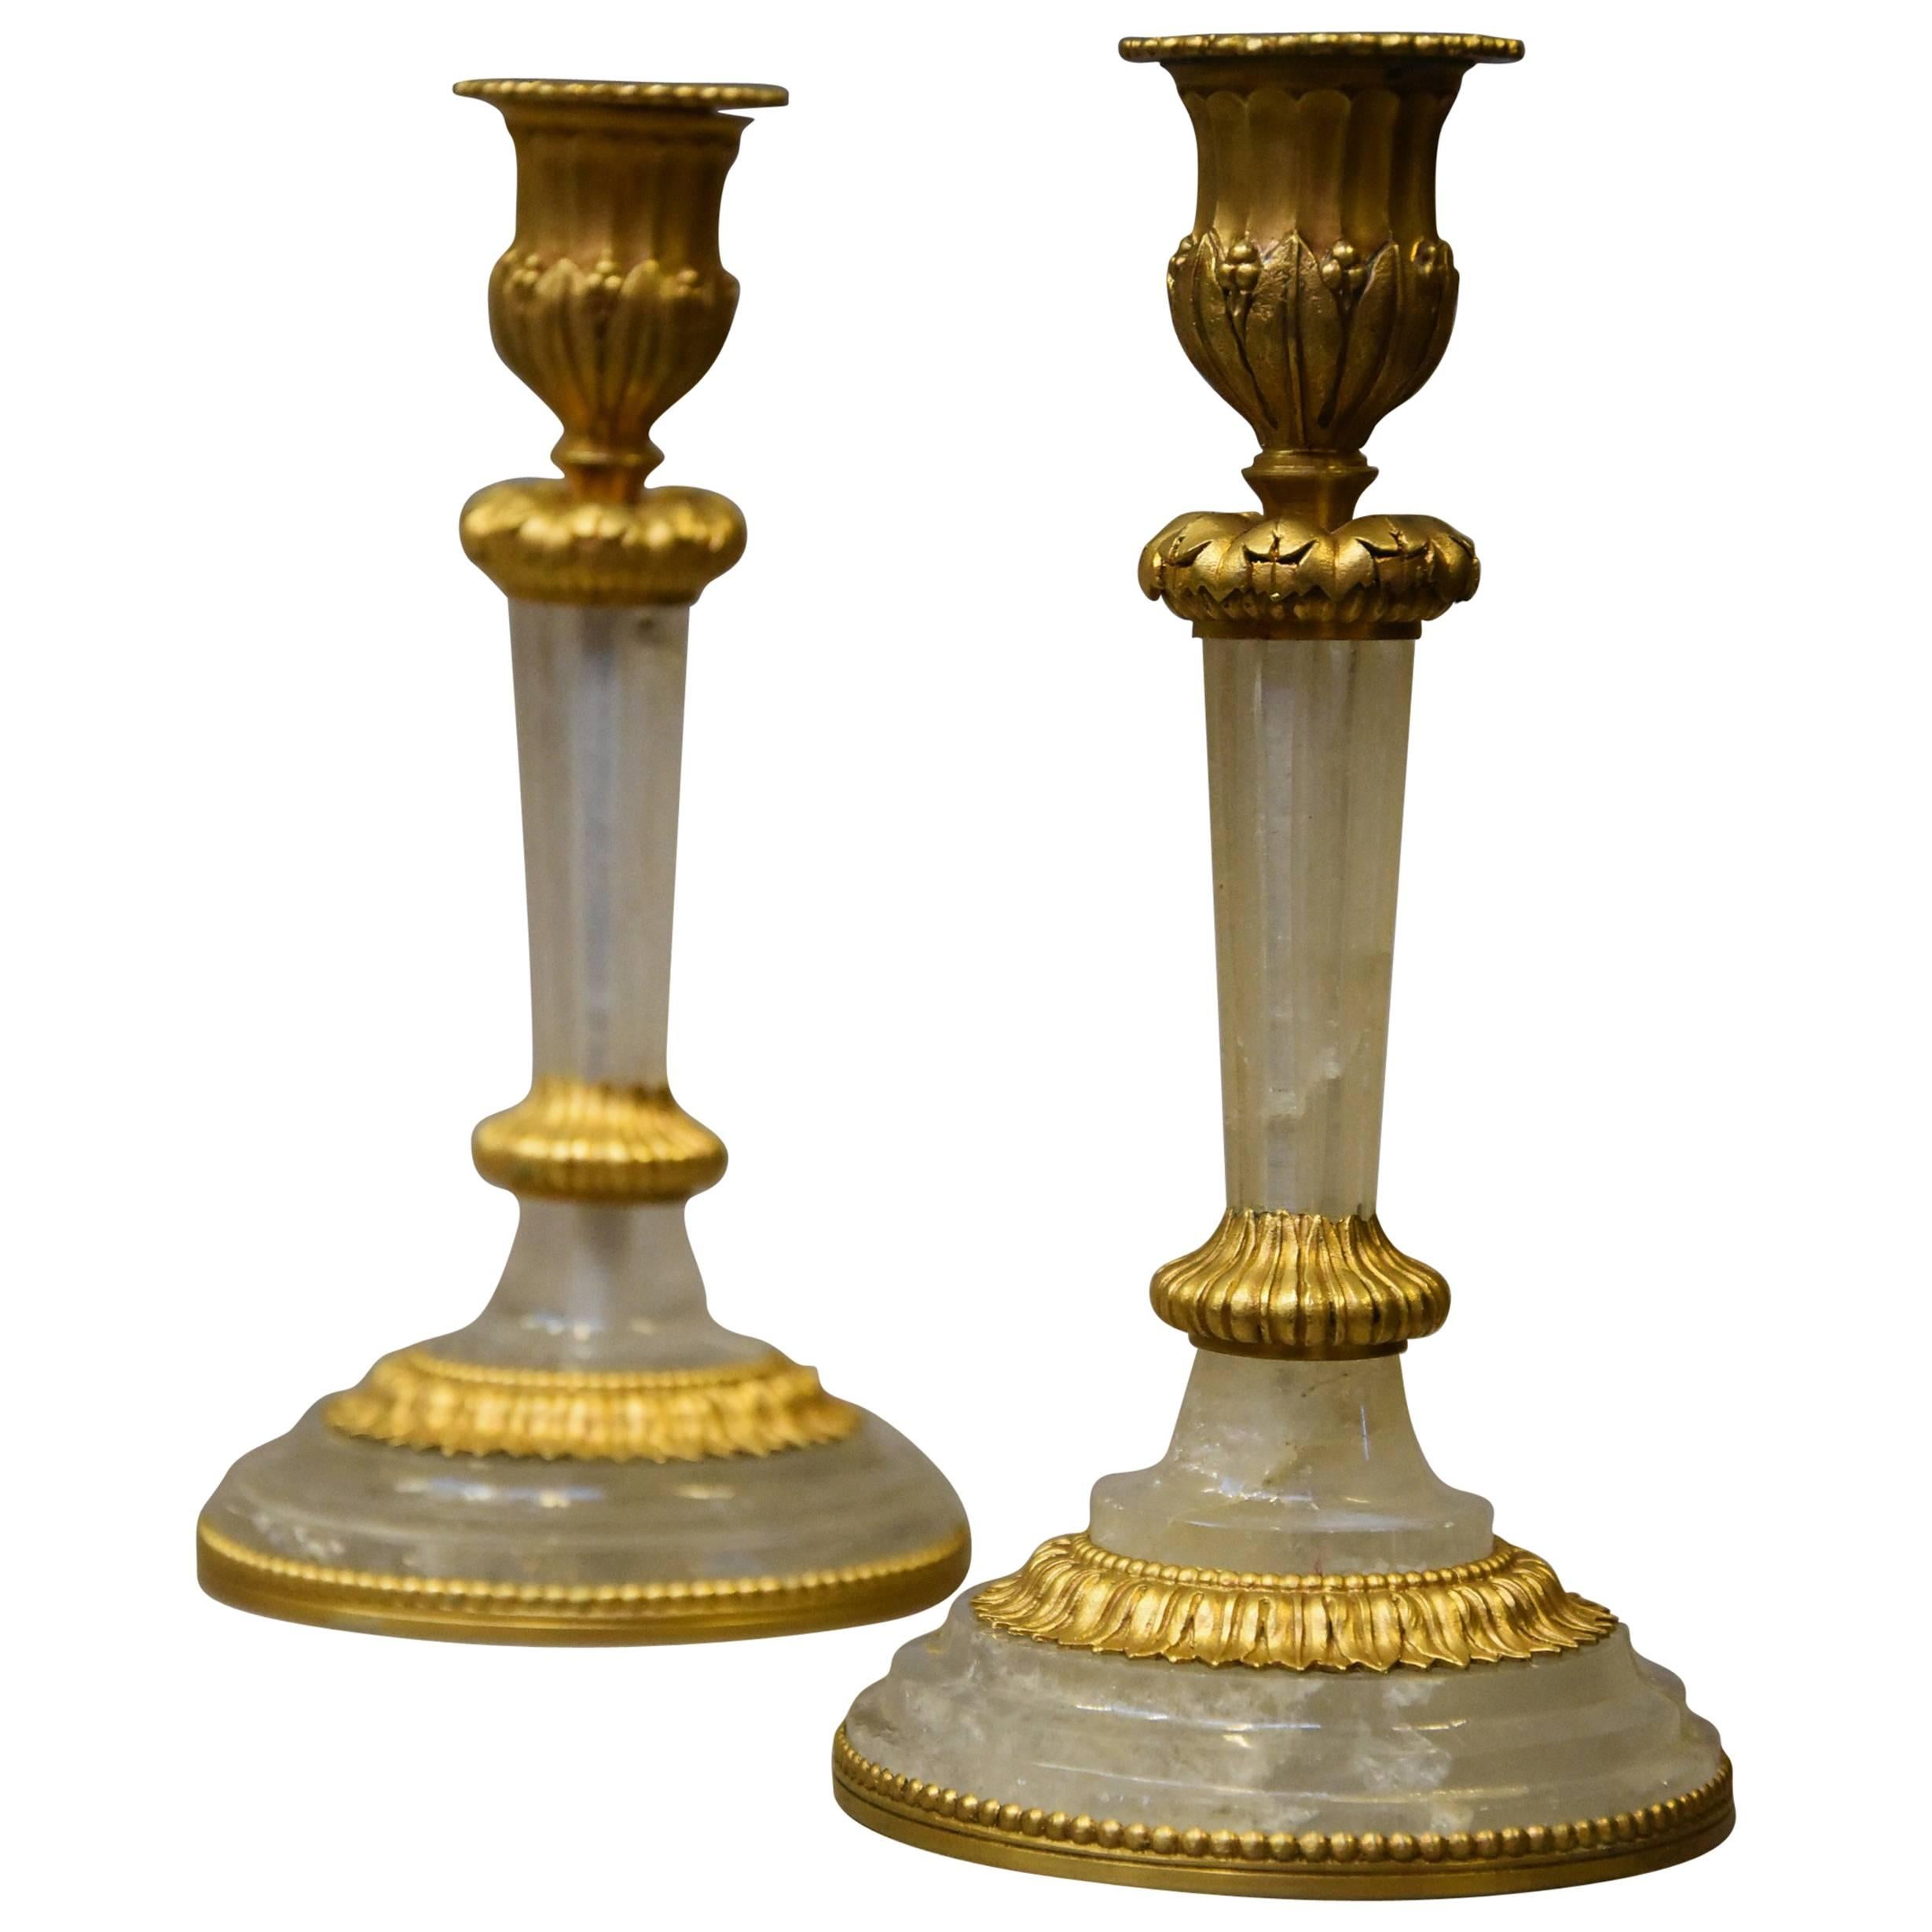 Pair of Elegant Early 20th Century Rock Crystal and Ormolu Candlesticks For Sale